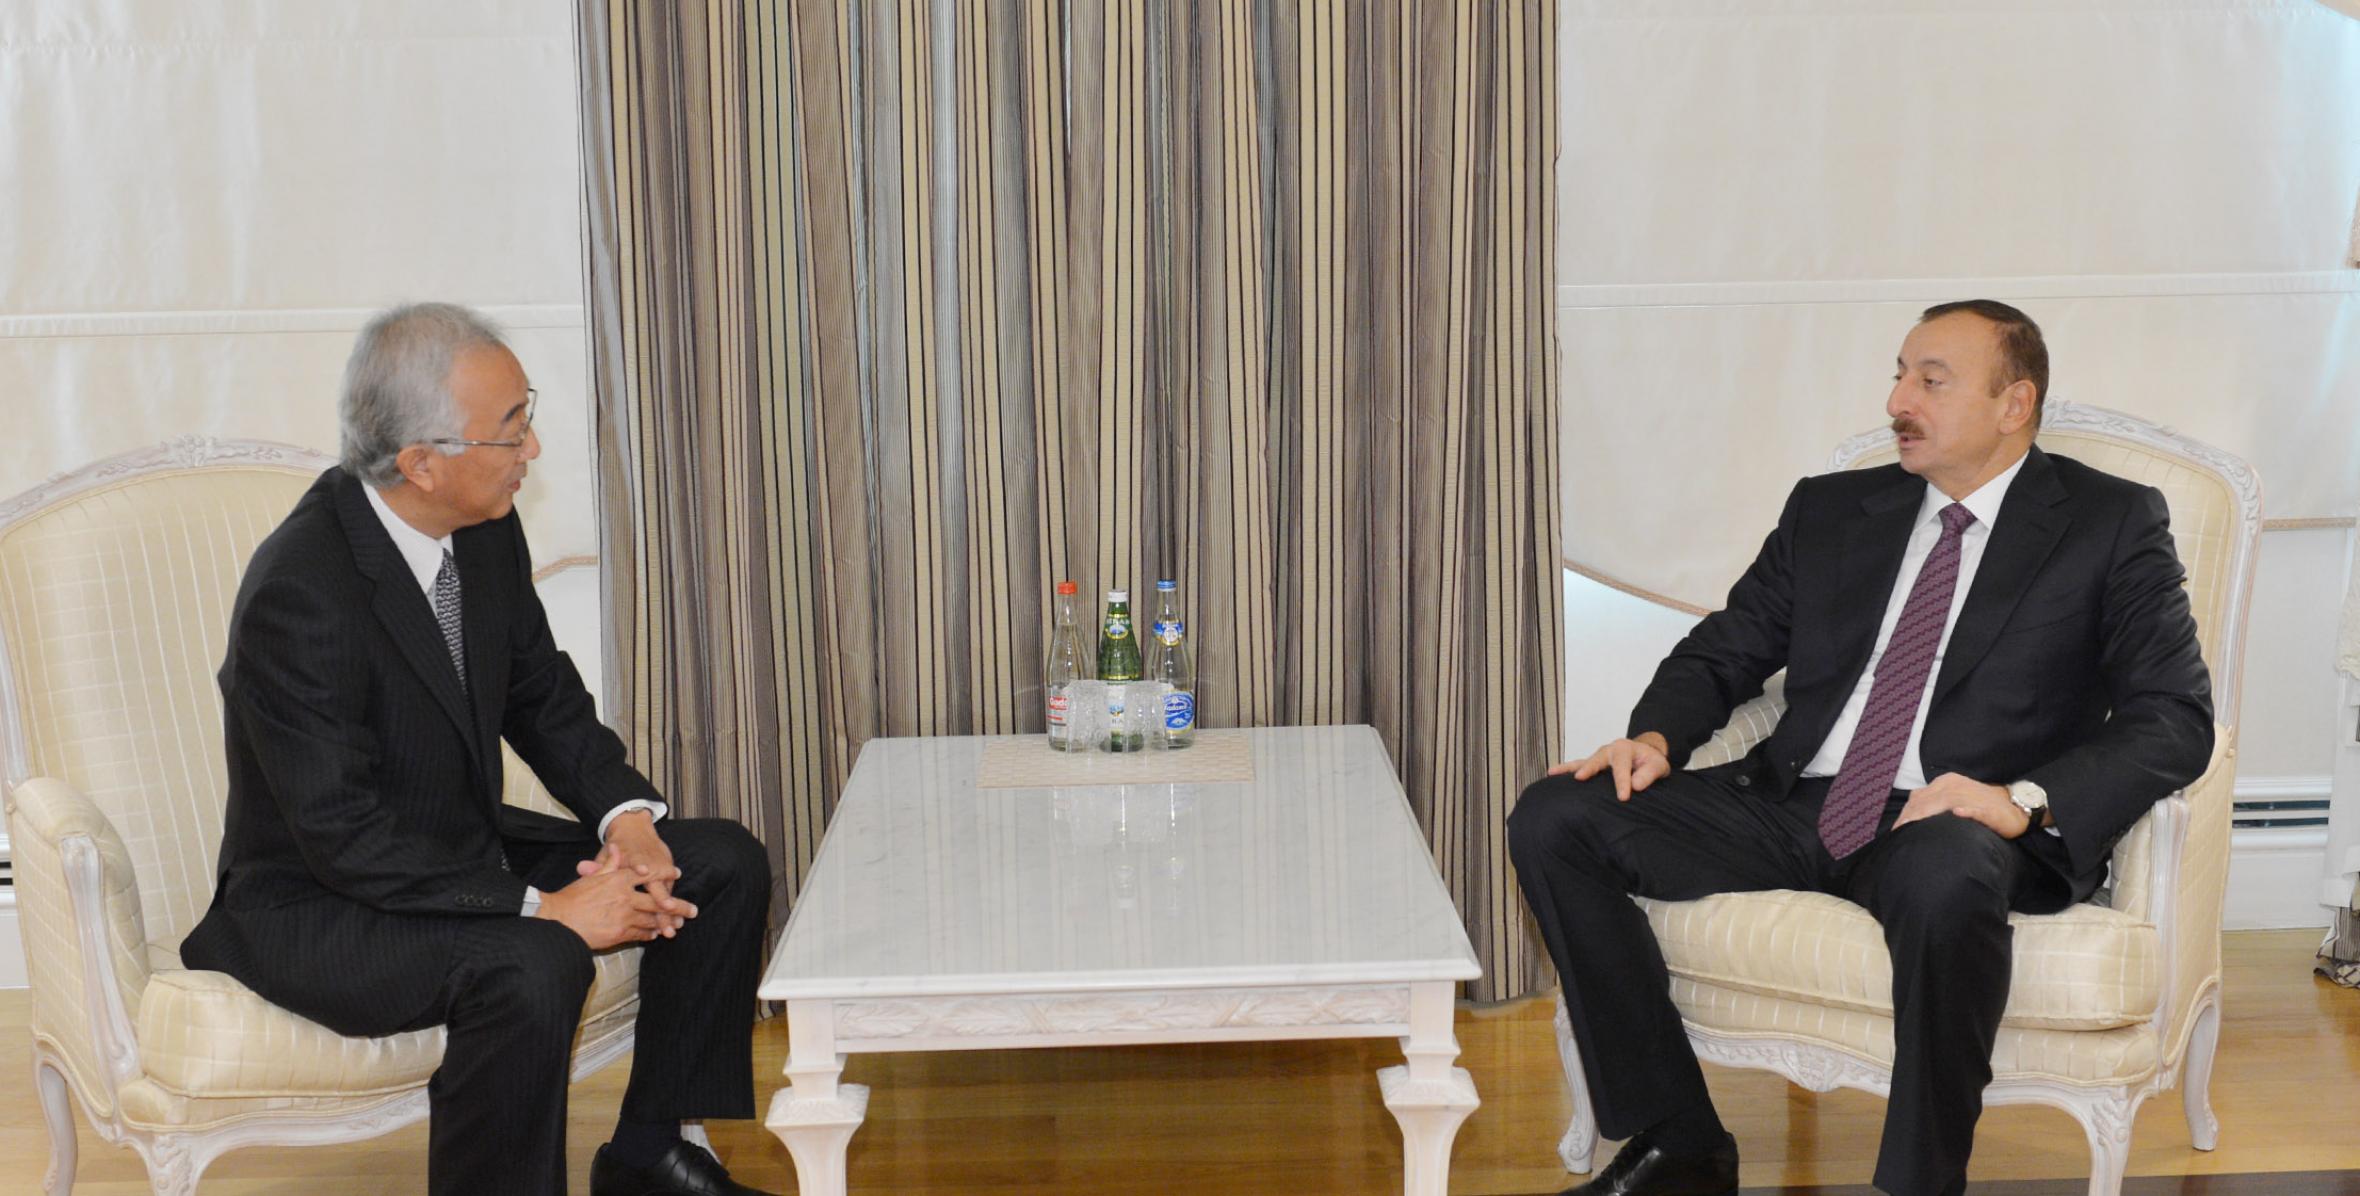 Ilham Aliyev received the Ambassador of Japan to Azerbaijan at the end of his diplomatic mission in the country